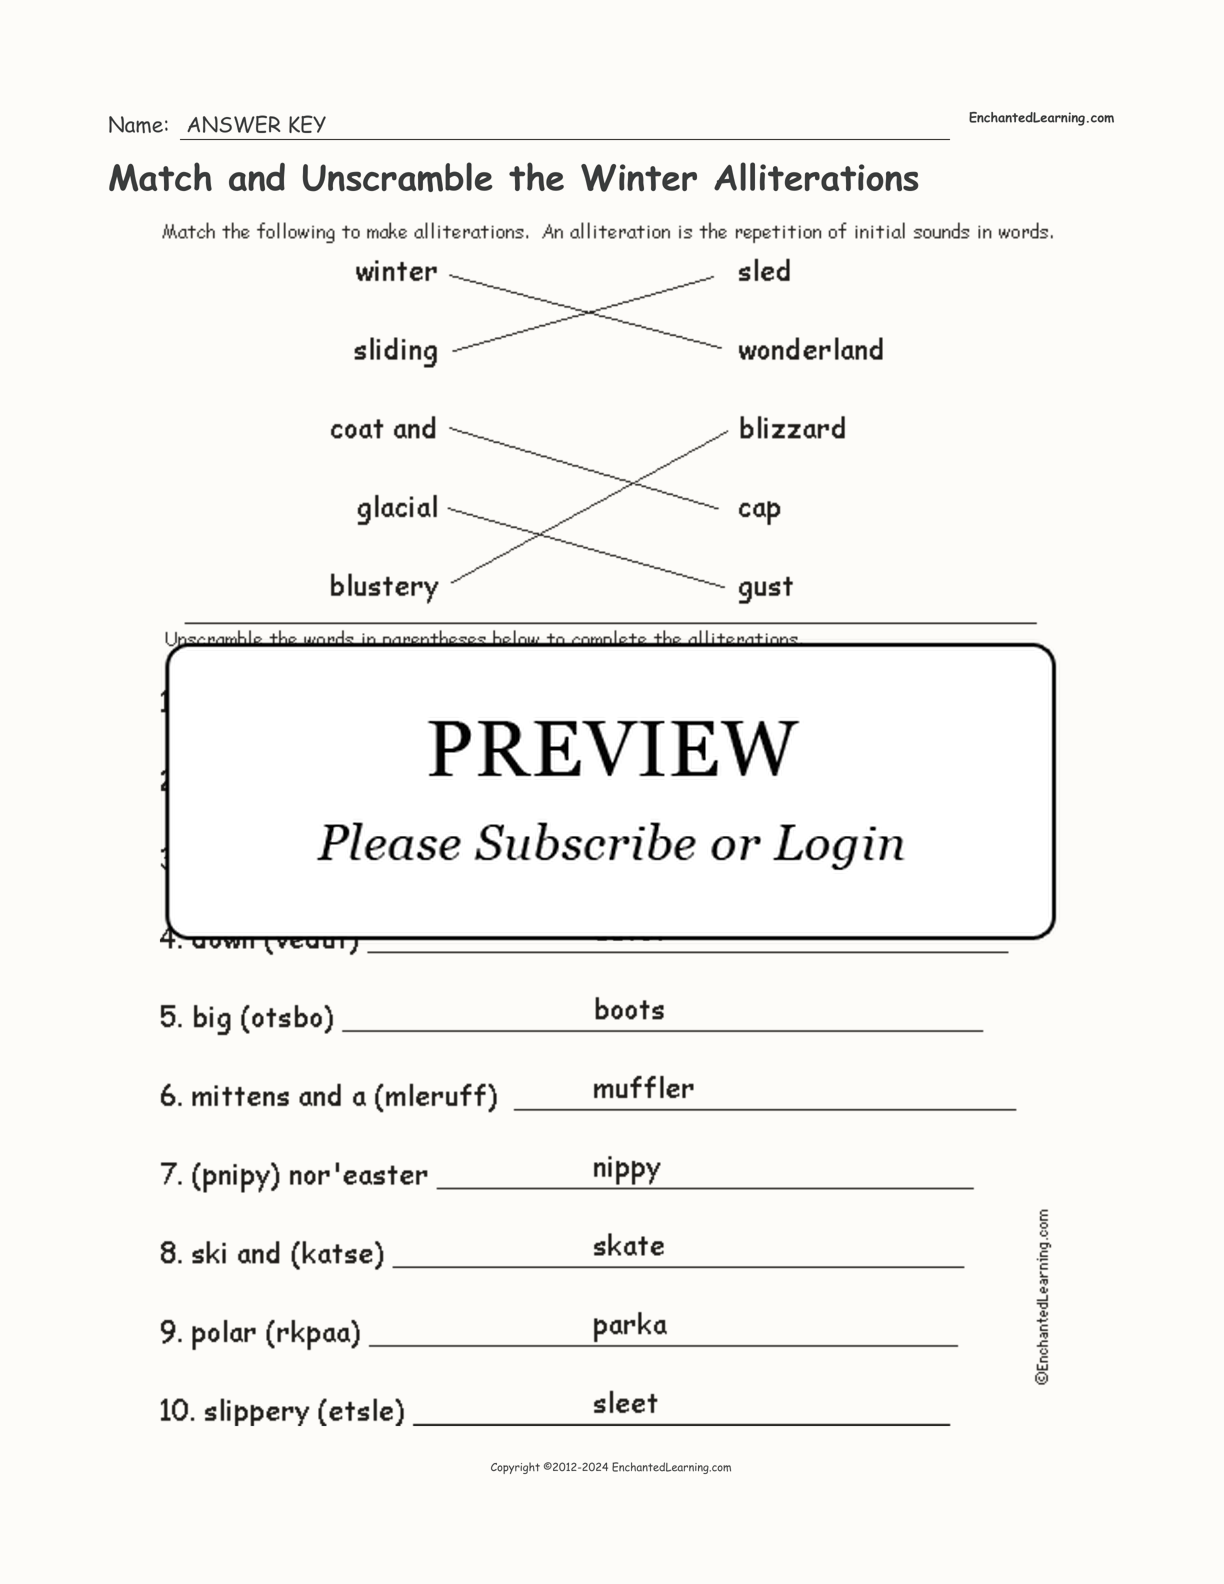 Match and Unscramble the Winter Alliterations interactive worksheet page 2